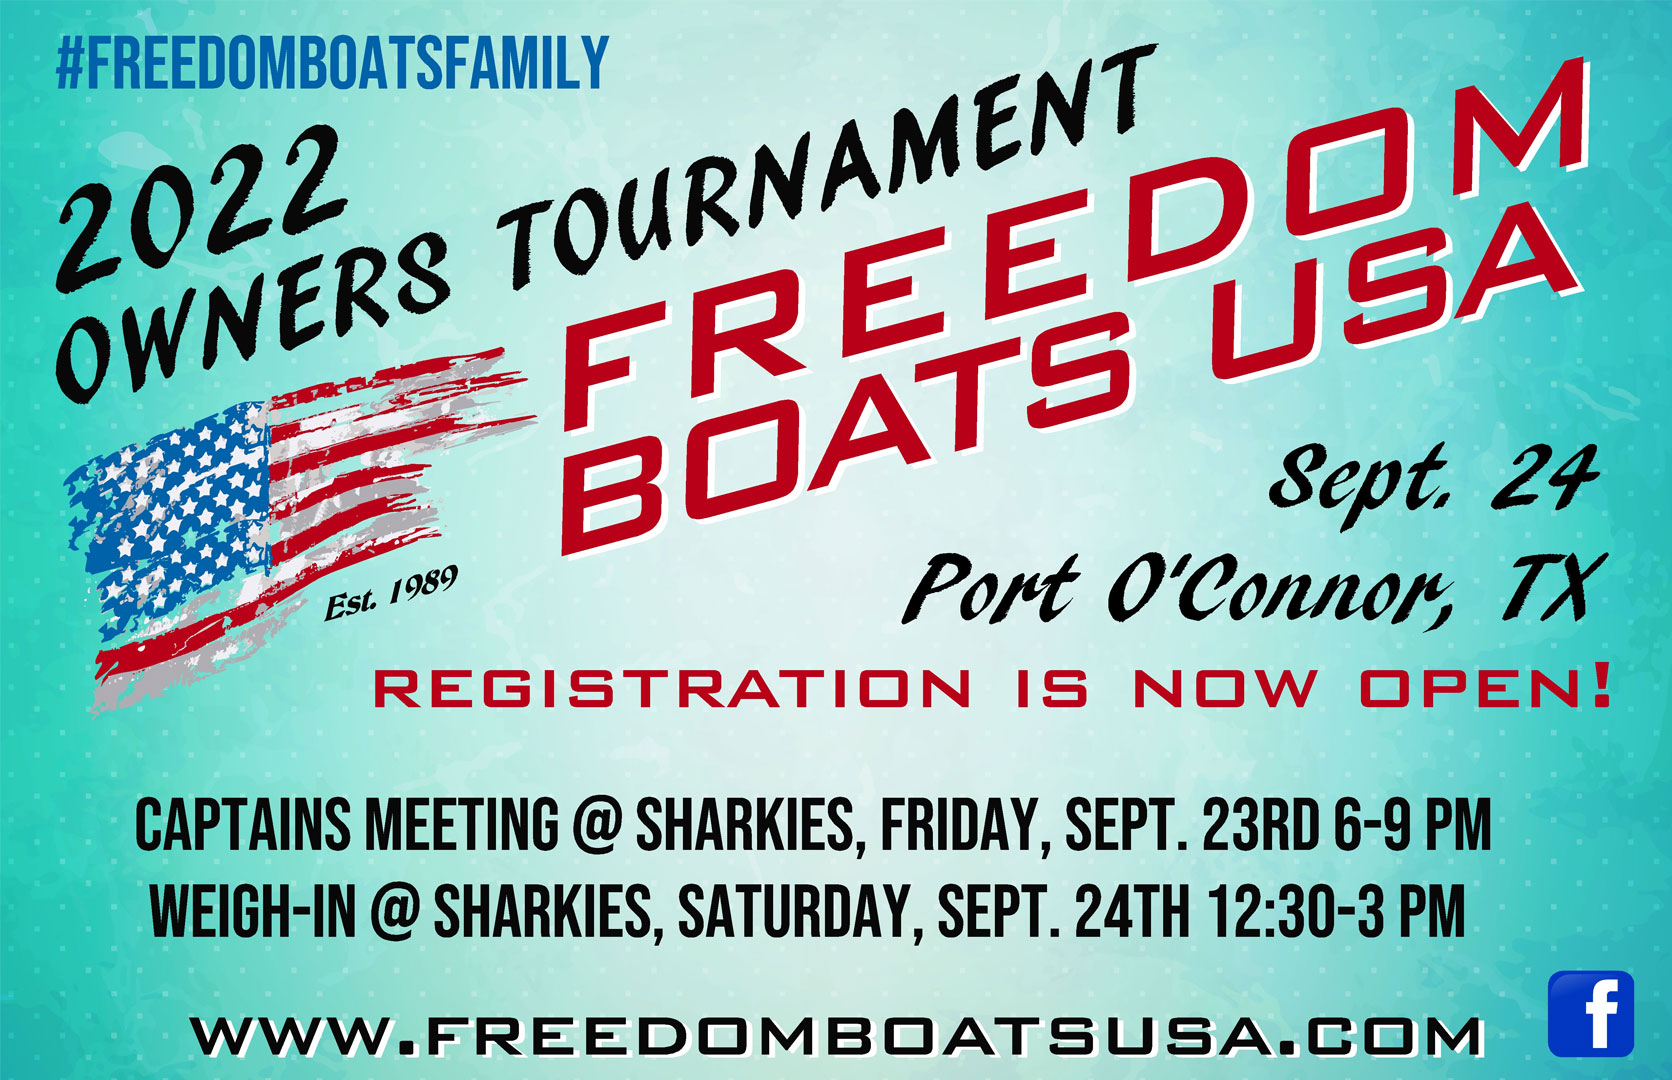 Freedom Boats Owner's tournament